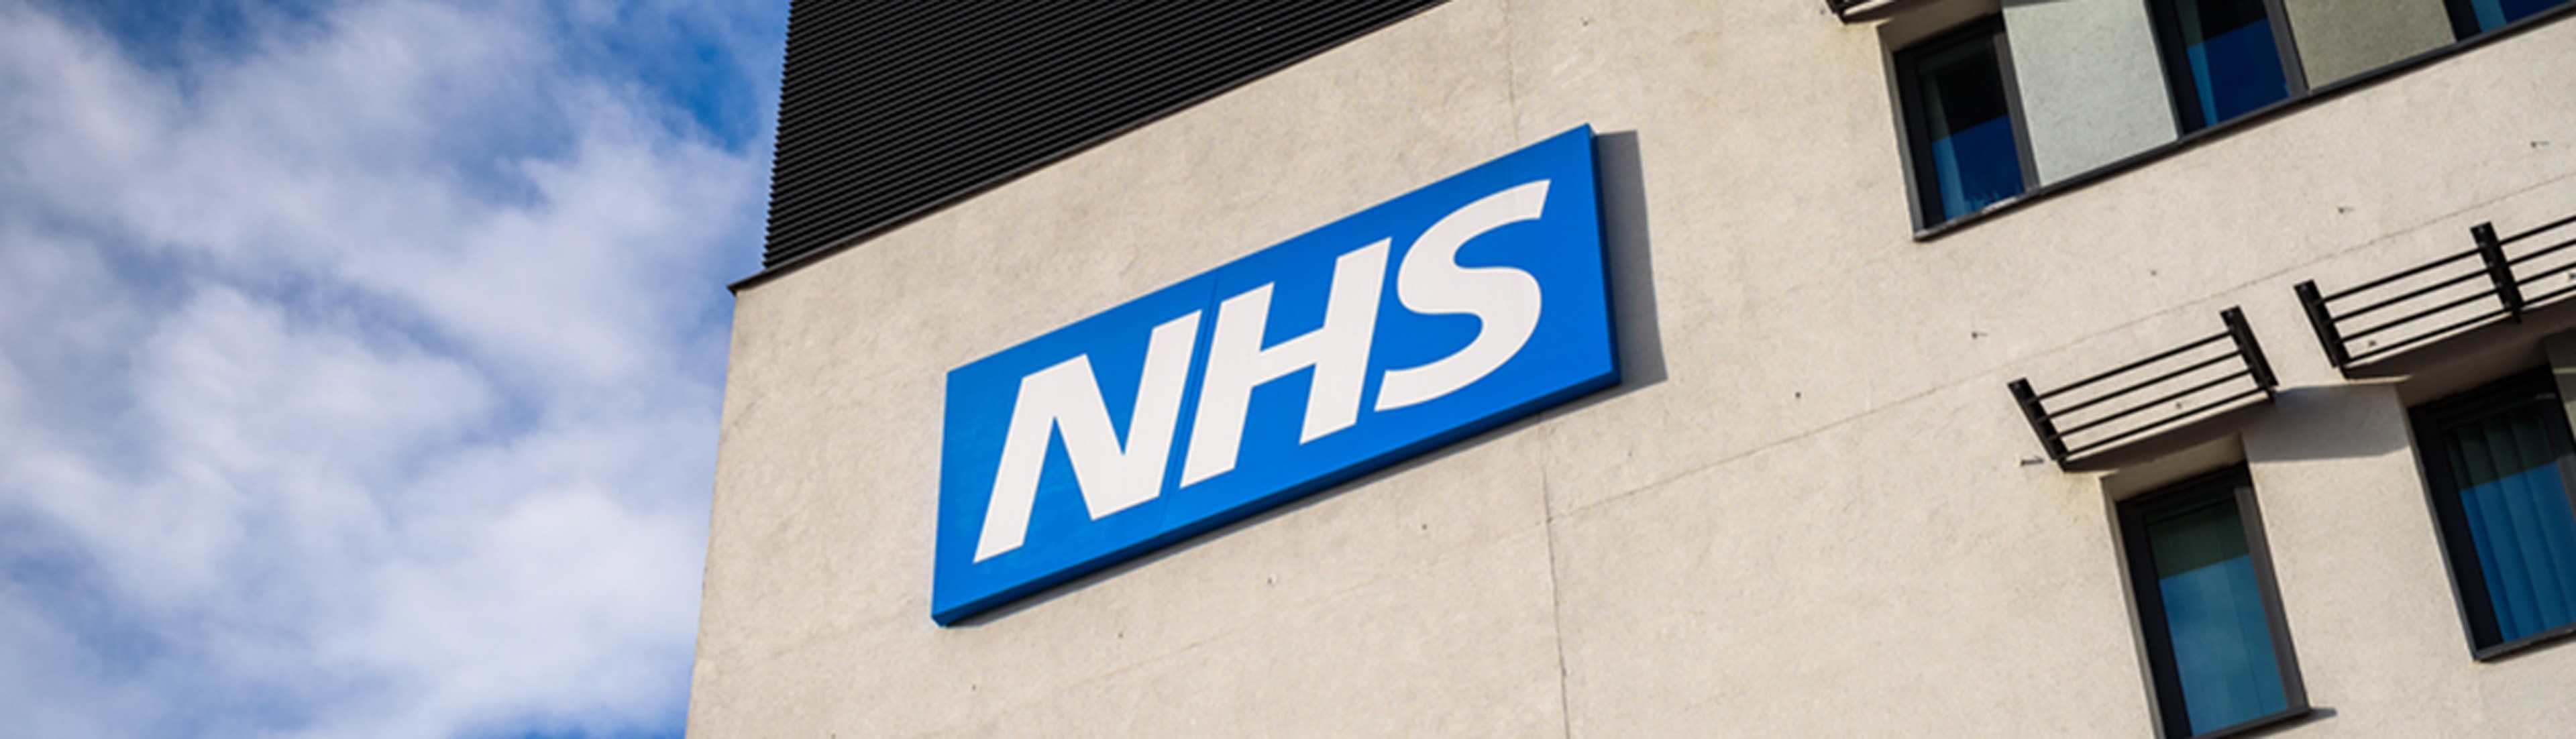 a picture of a building with the "NHS" sign on it